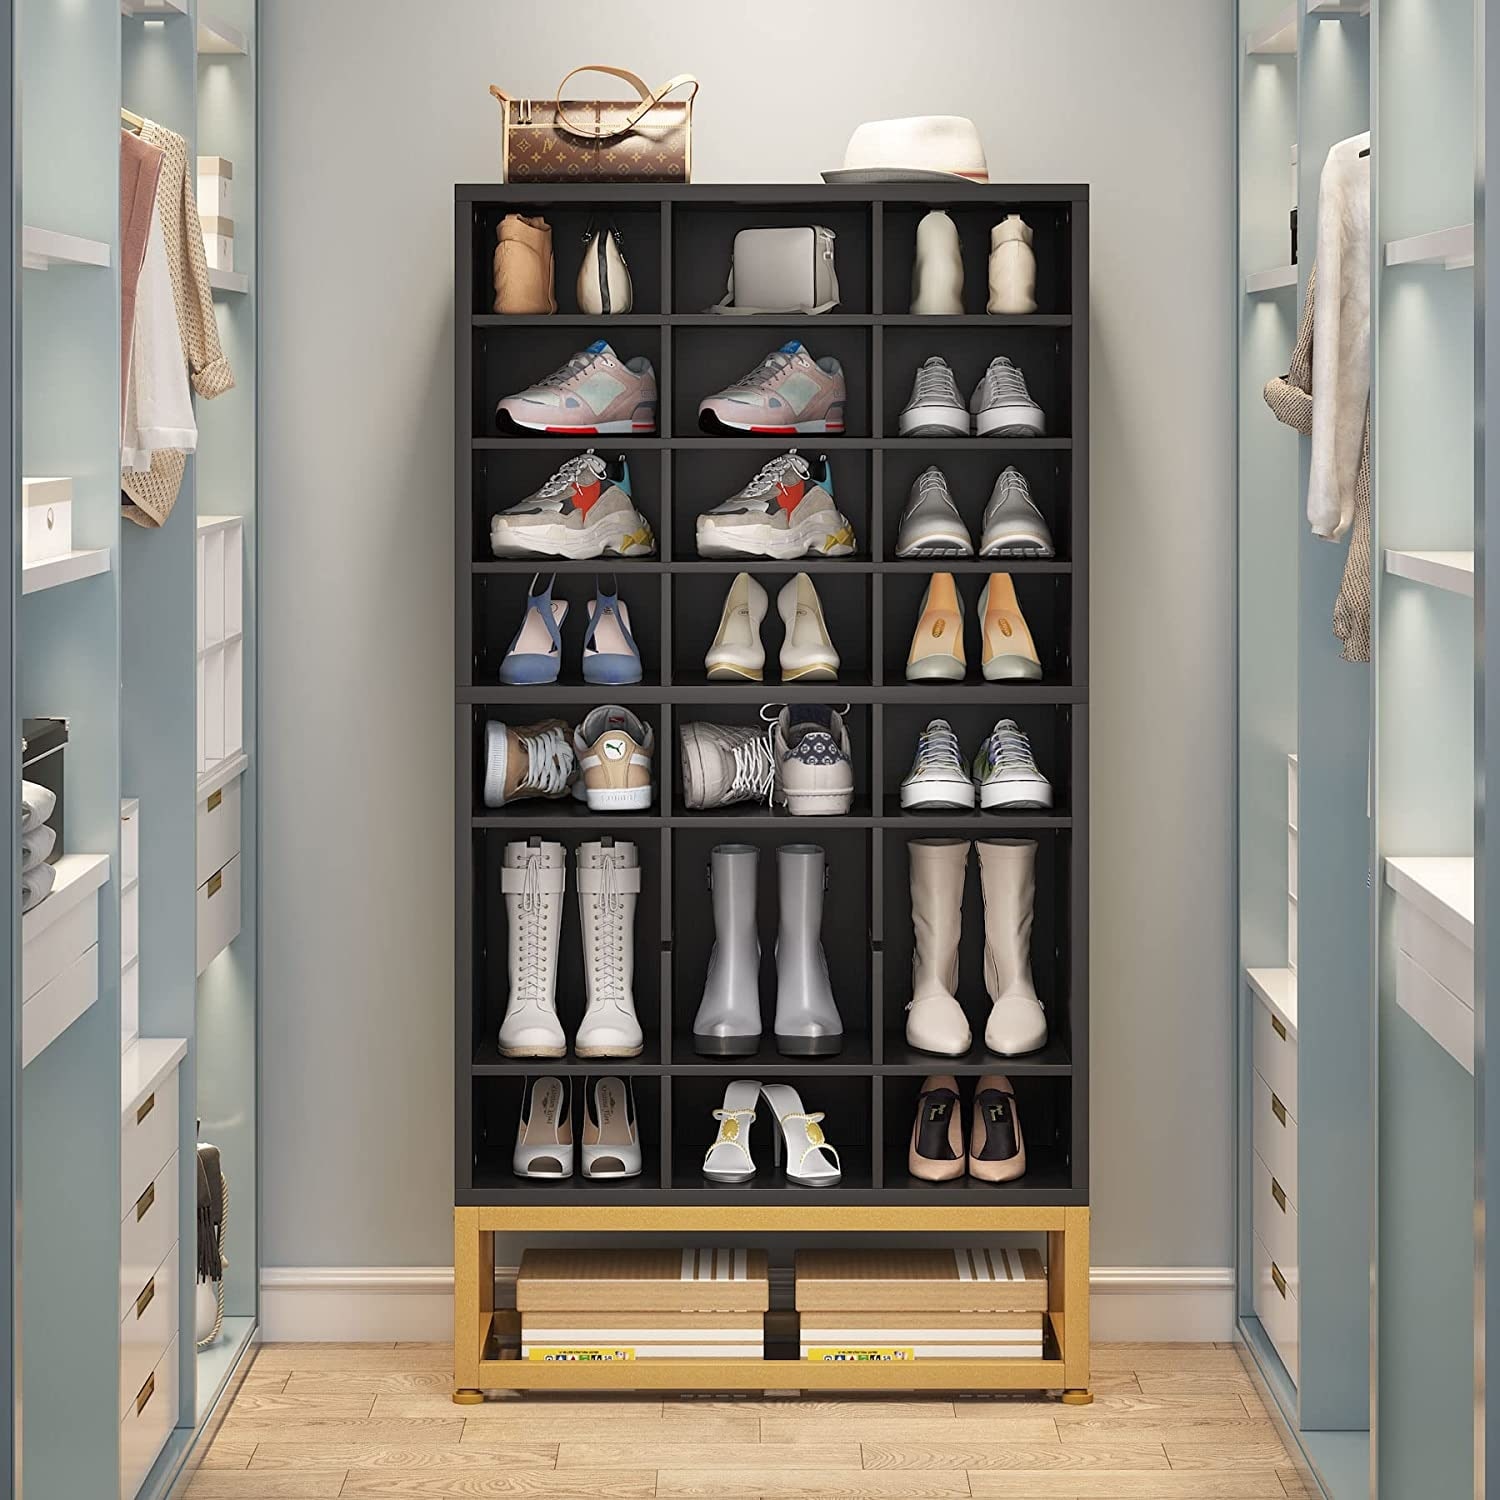 https://ak1.ostkcdn.com/images/products/is/images/direct/d7f5283e228194c4aebbe37ba051ba346dcd6745/Tall-Shoe-Storage%2C-24-Cubby-Cabinet%2C-White.jpg